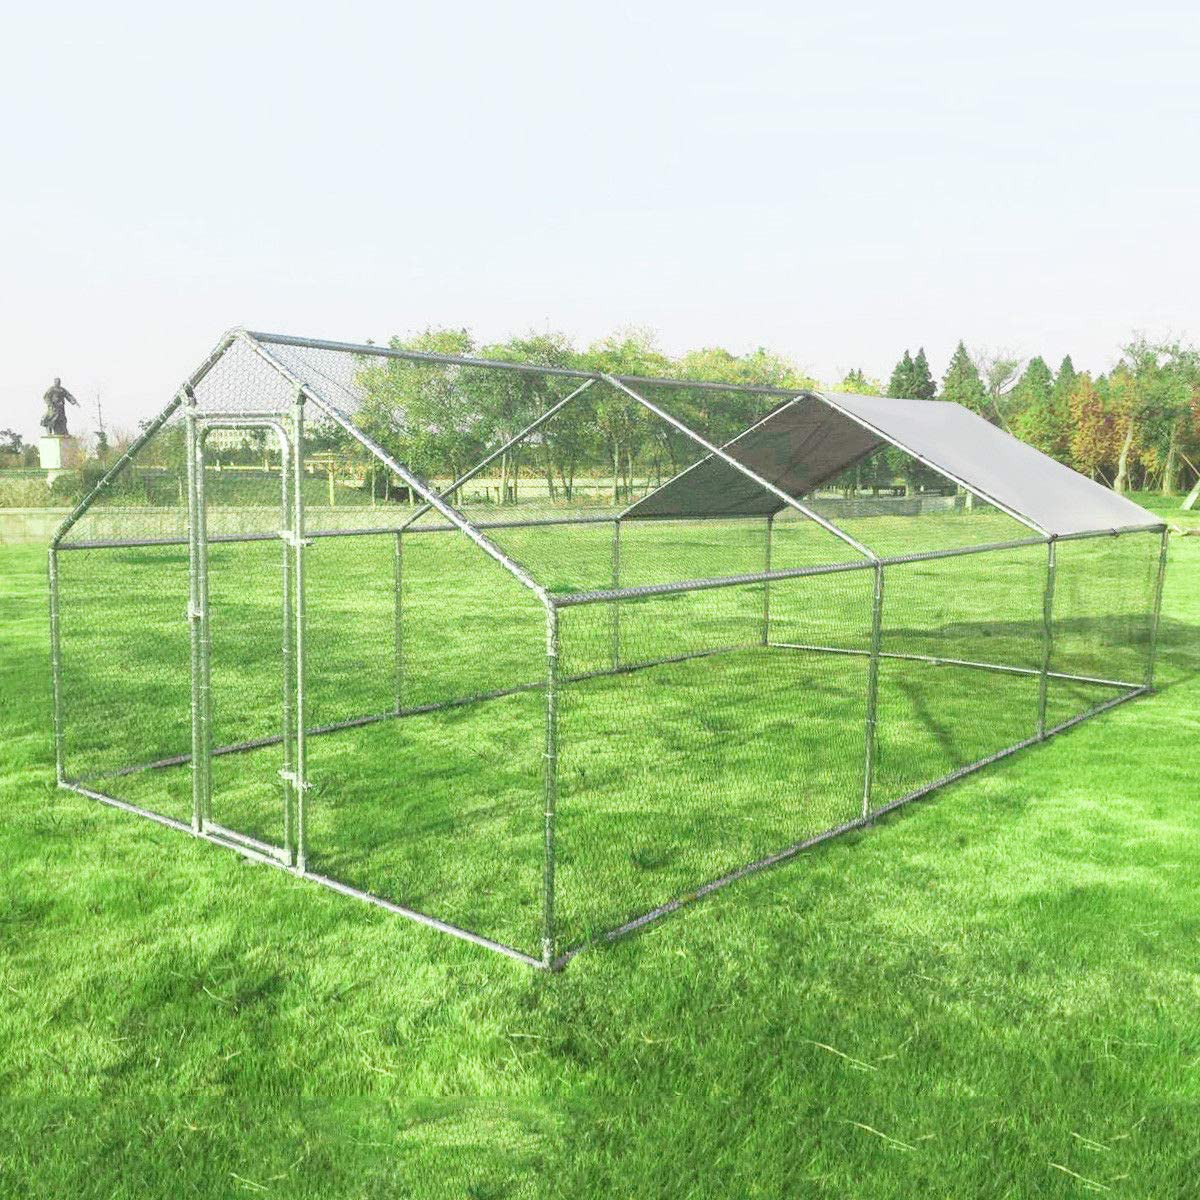 Large Metal Chicken Coop Walk-In Chicken Coops Run House Shade Cage with Waterproof and Sun Protection Cover for Outdoor Backyard Farm Use (13 X 13Ft)